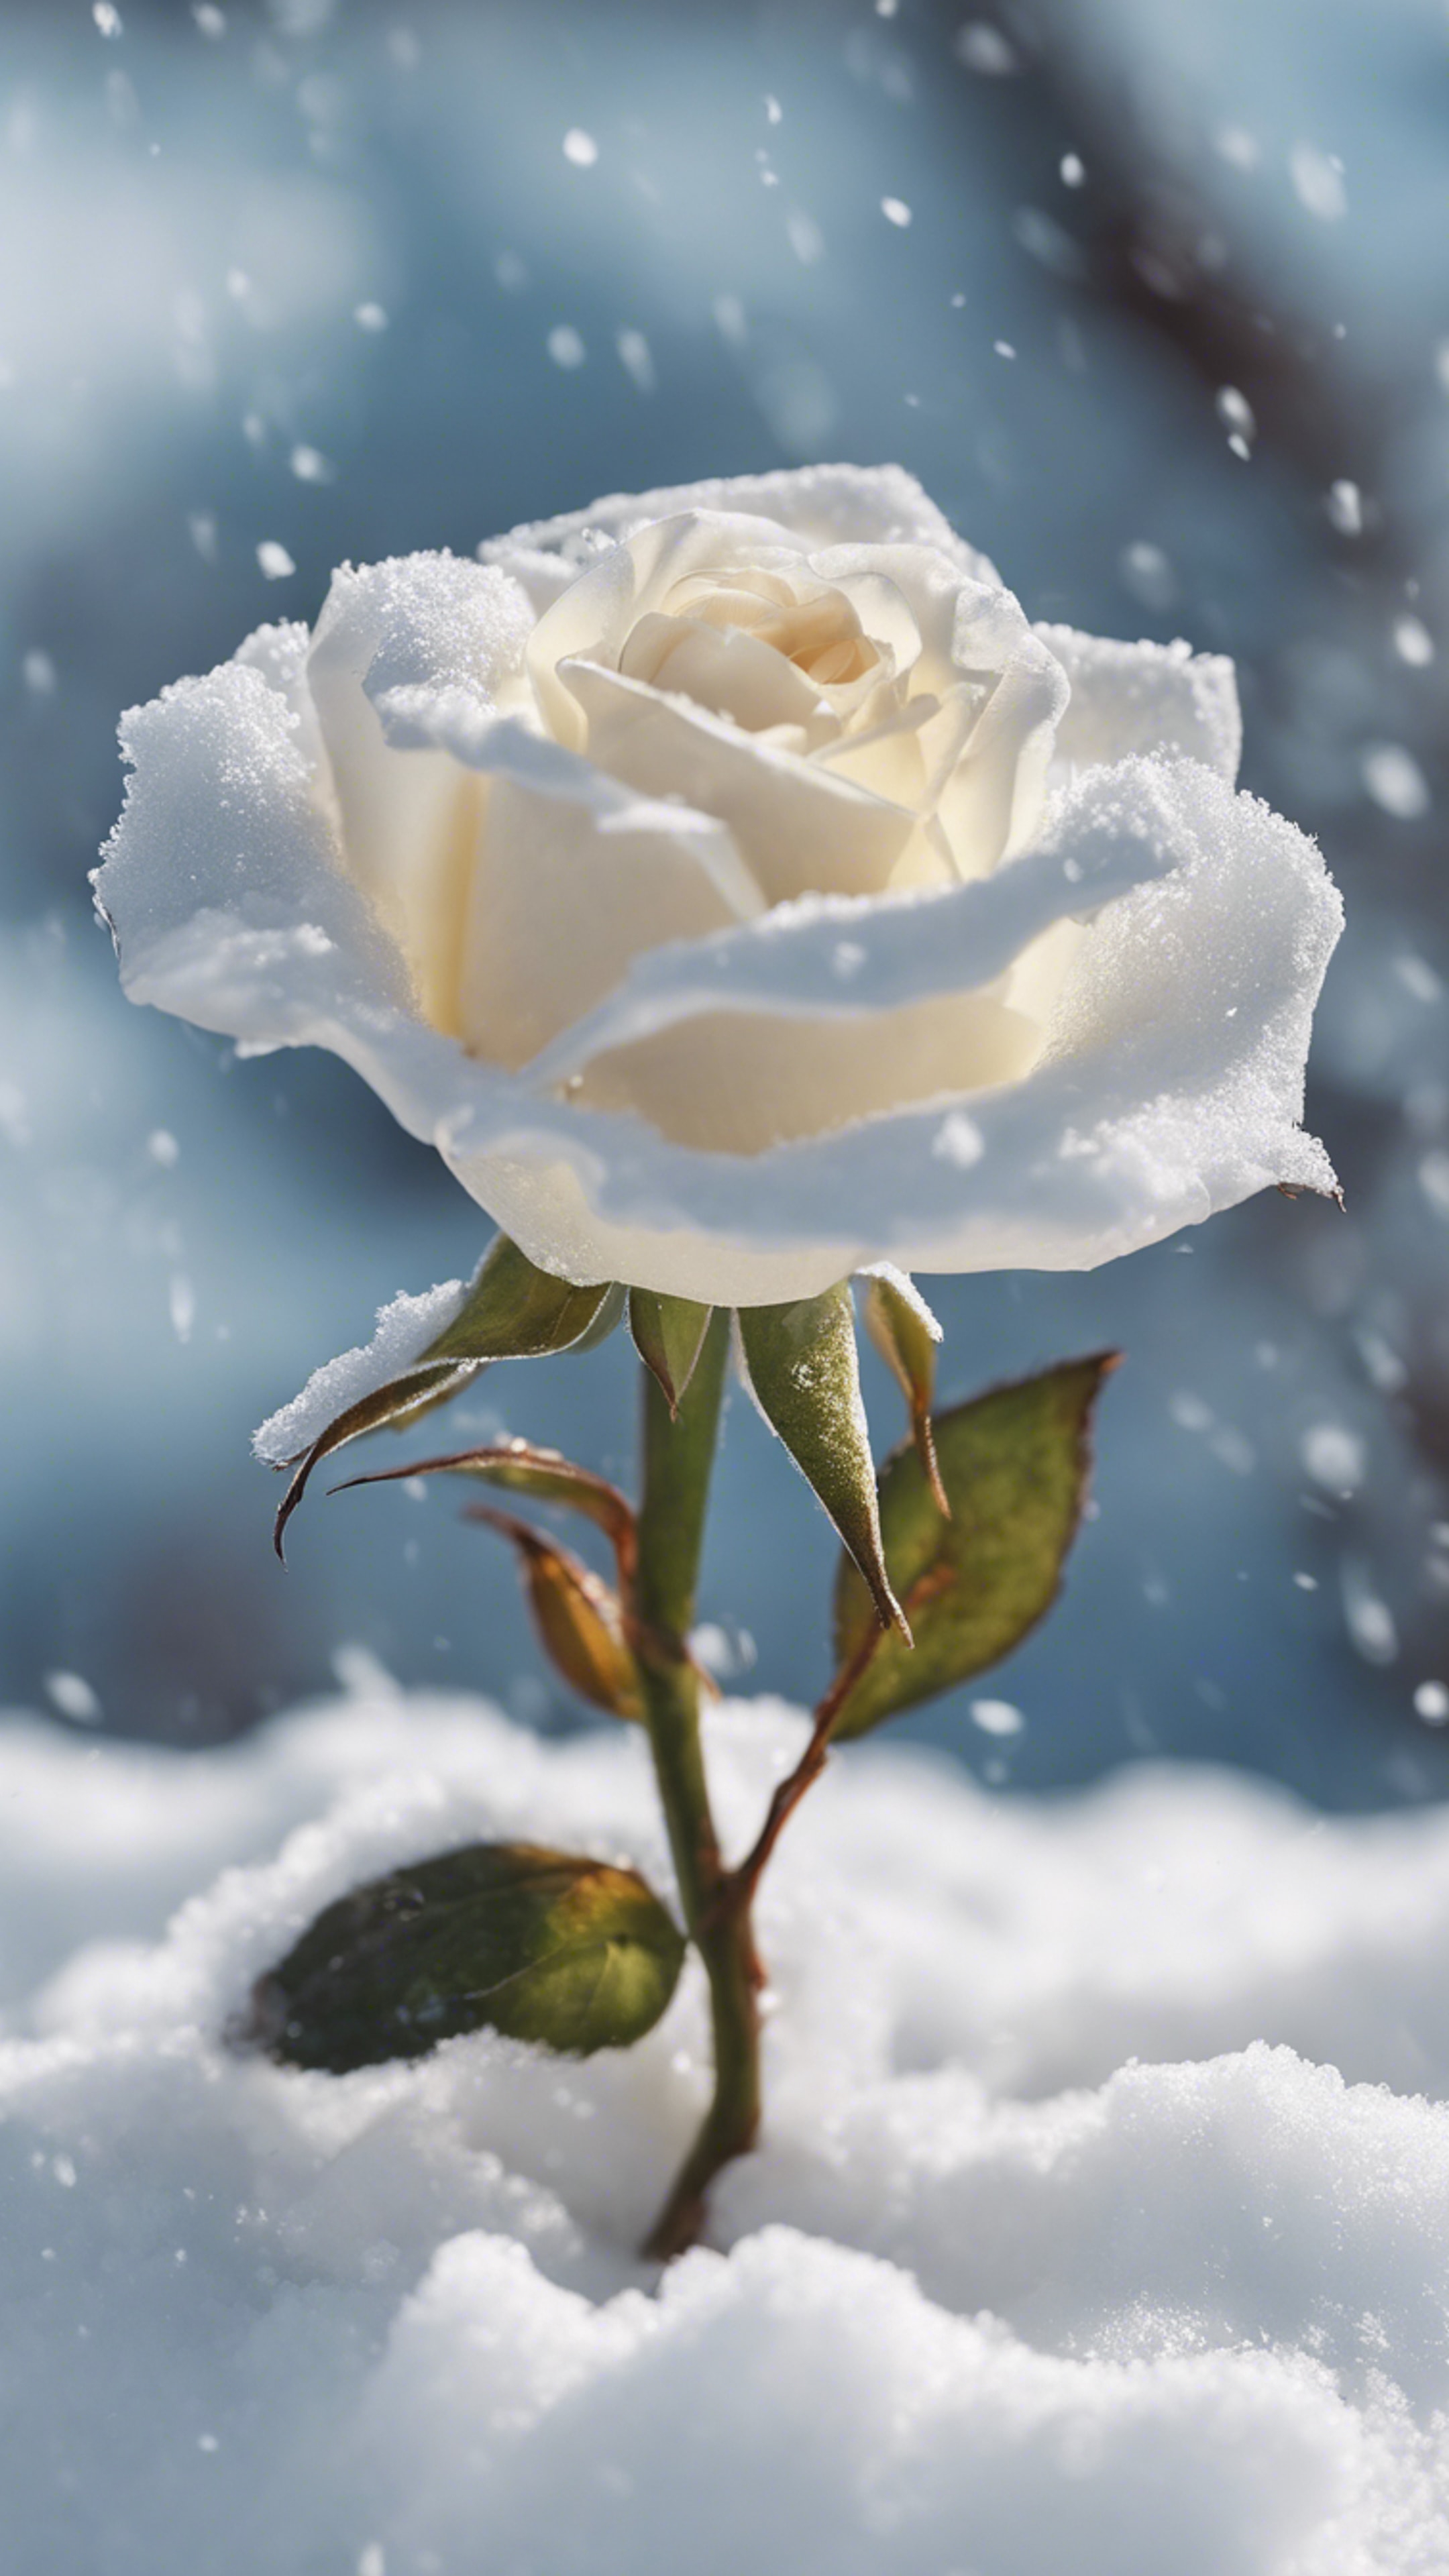 A newly opened white rose sticking out of a snowdrift in early spring. Hintergrund[6918b7c4f5774047824c]